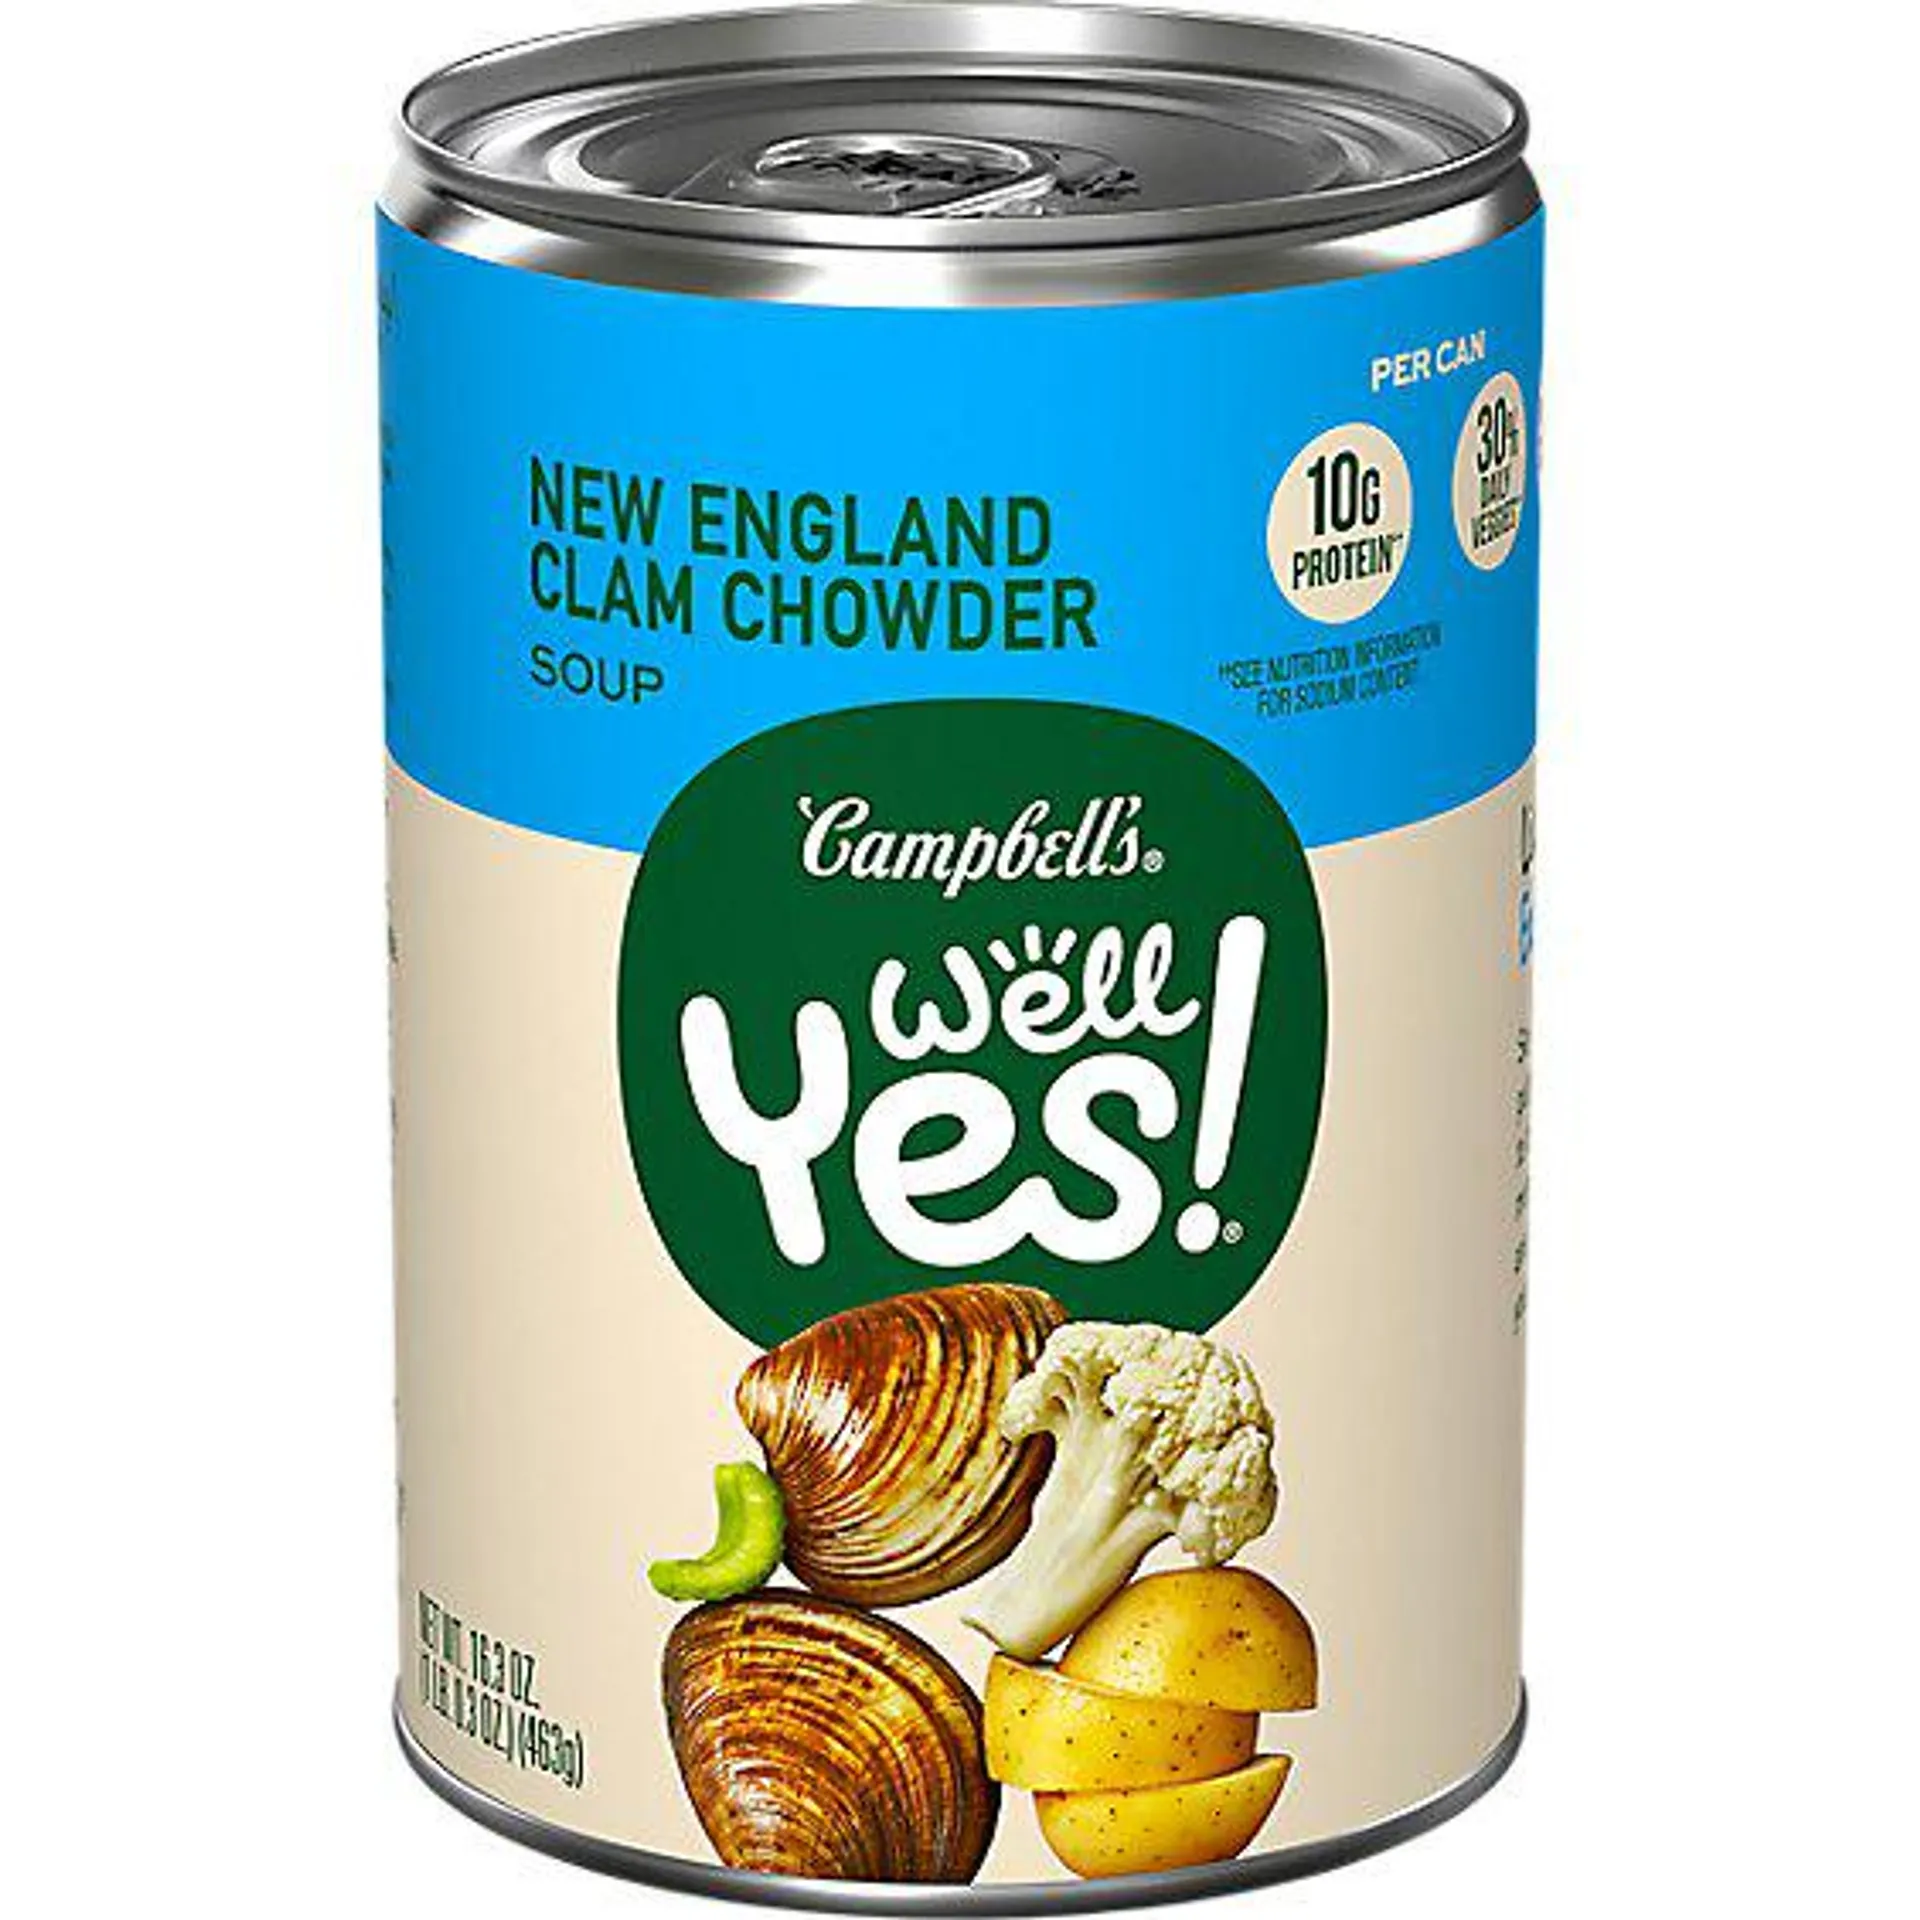 Campbells New England Clam Chowder Well Yes Soup - 16.3 Oz